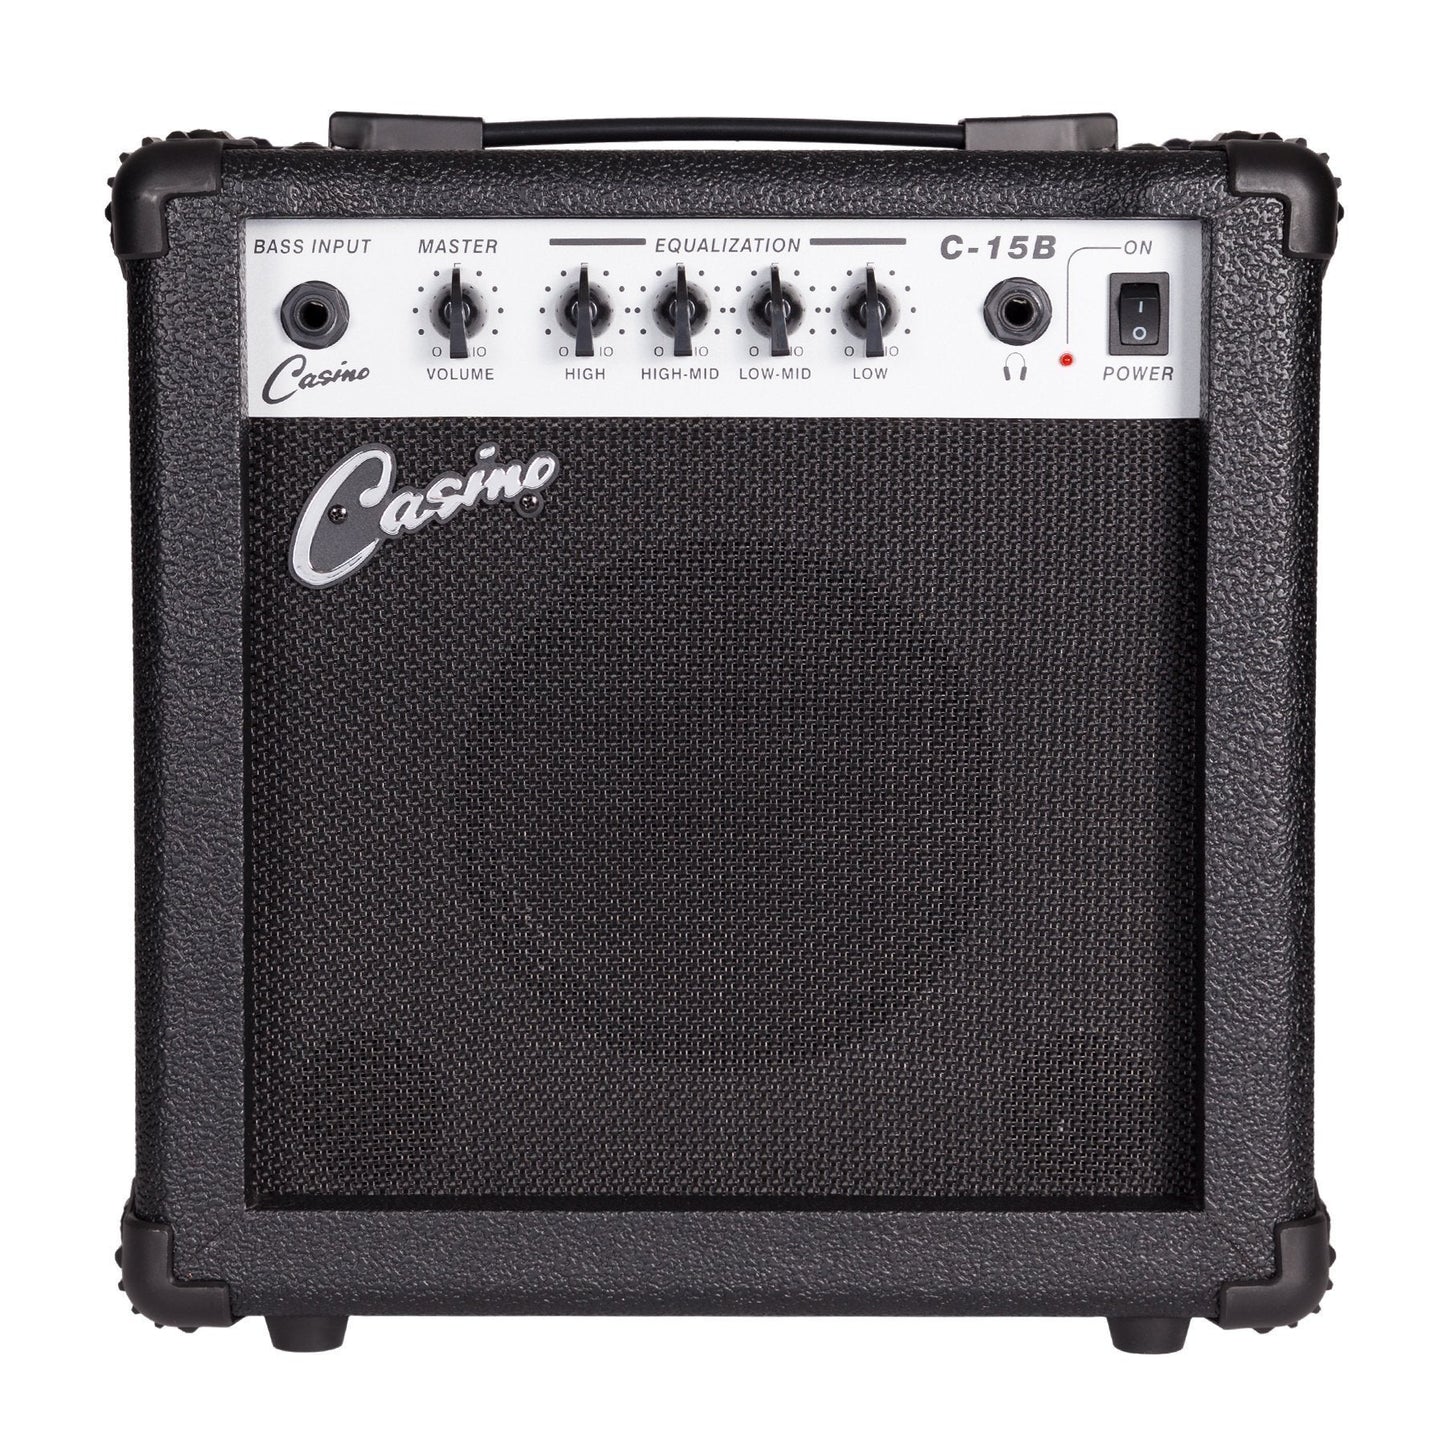 Casino P-Style Electric Bass Guitar and 15 Watt Amplifier Pack (White)